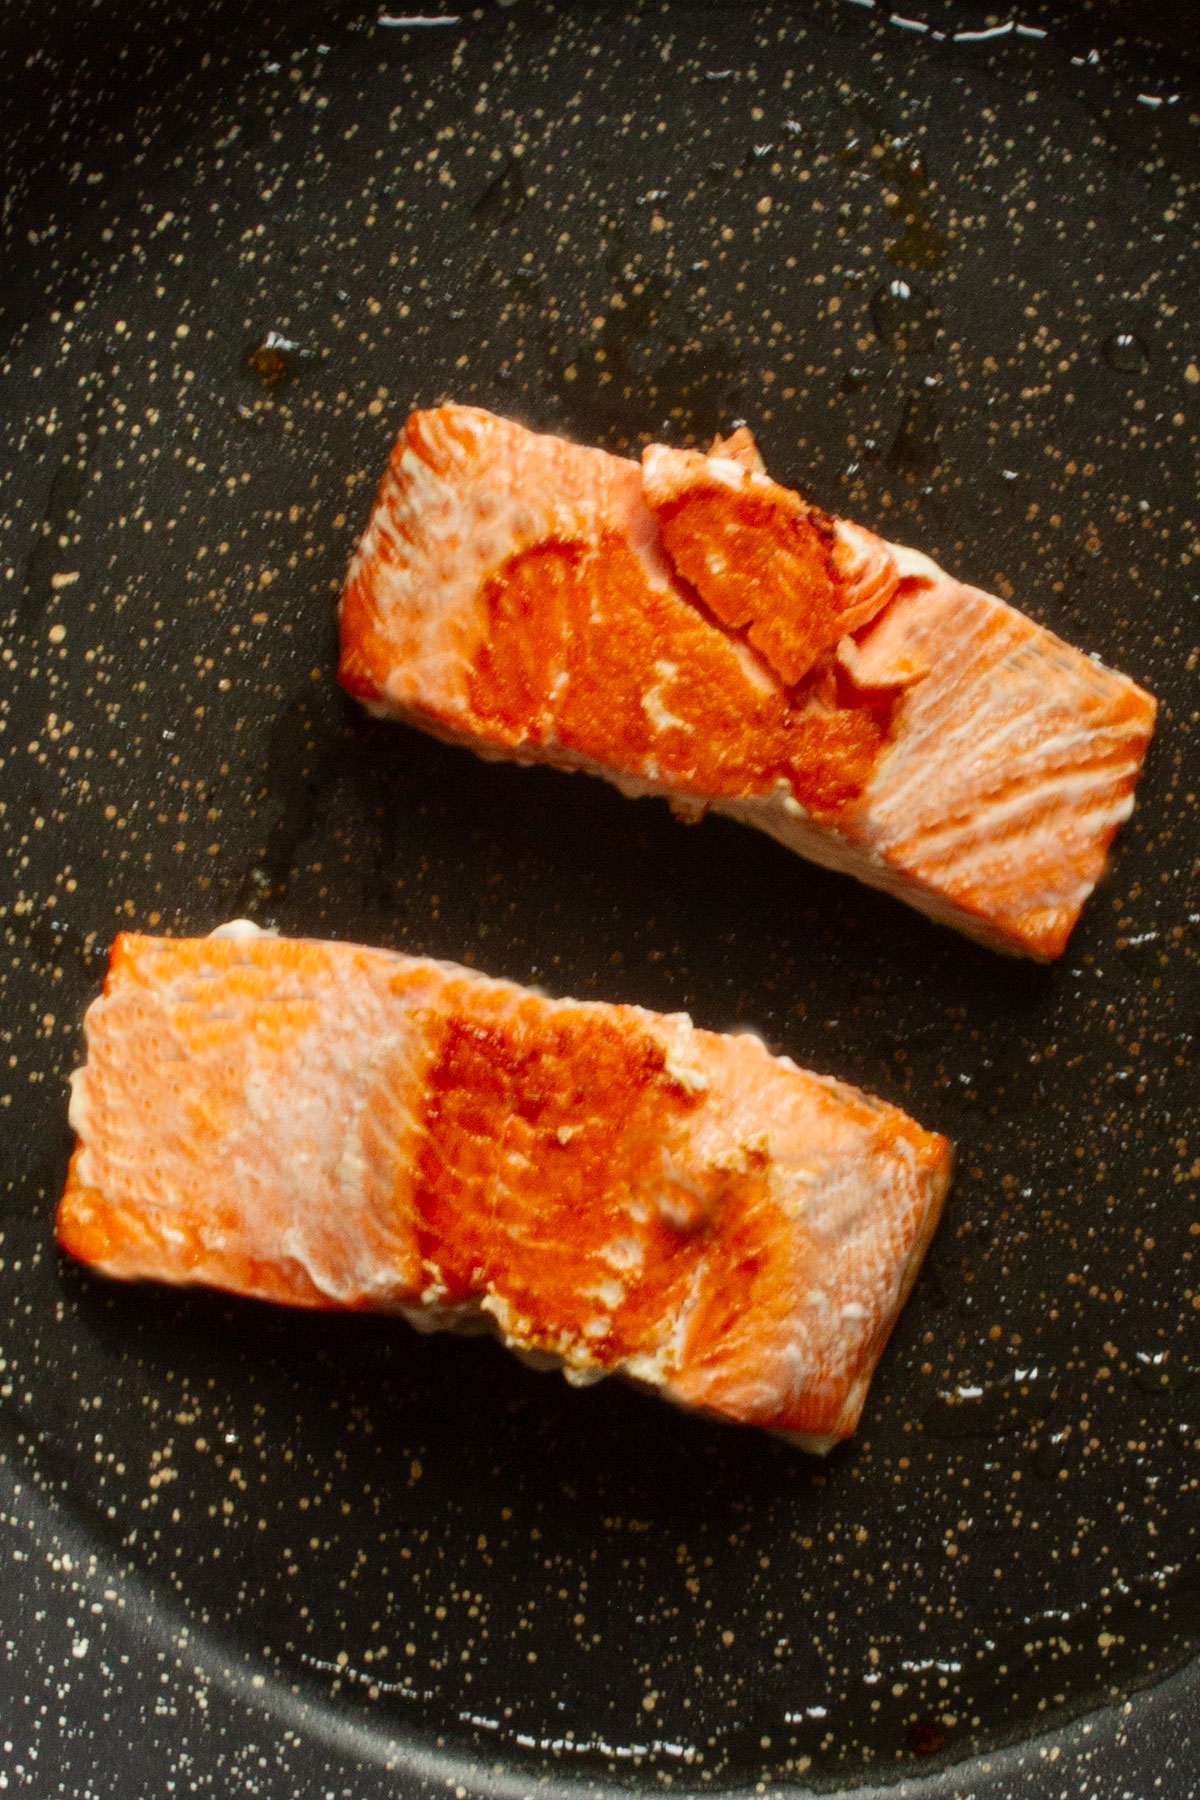 Pan-frying the salmon fillets for 2-3 minutes on each side until they are cooked through.